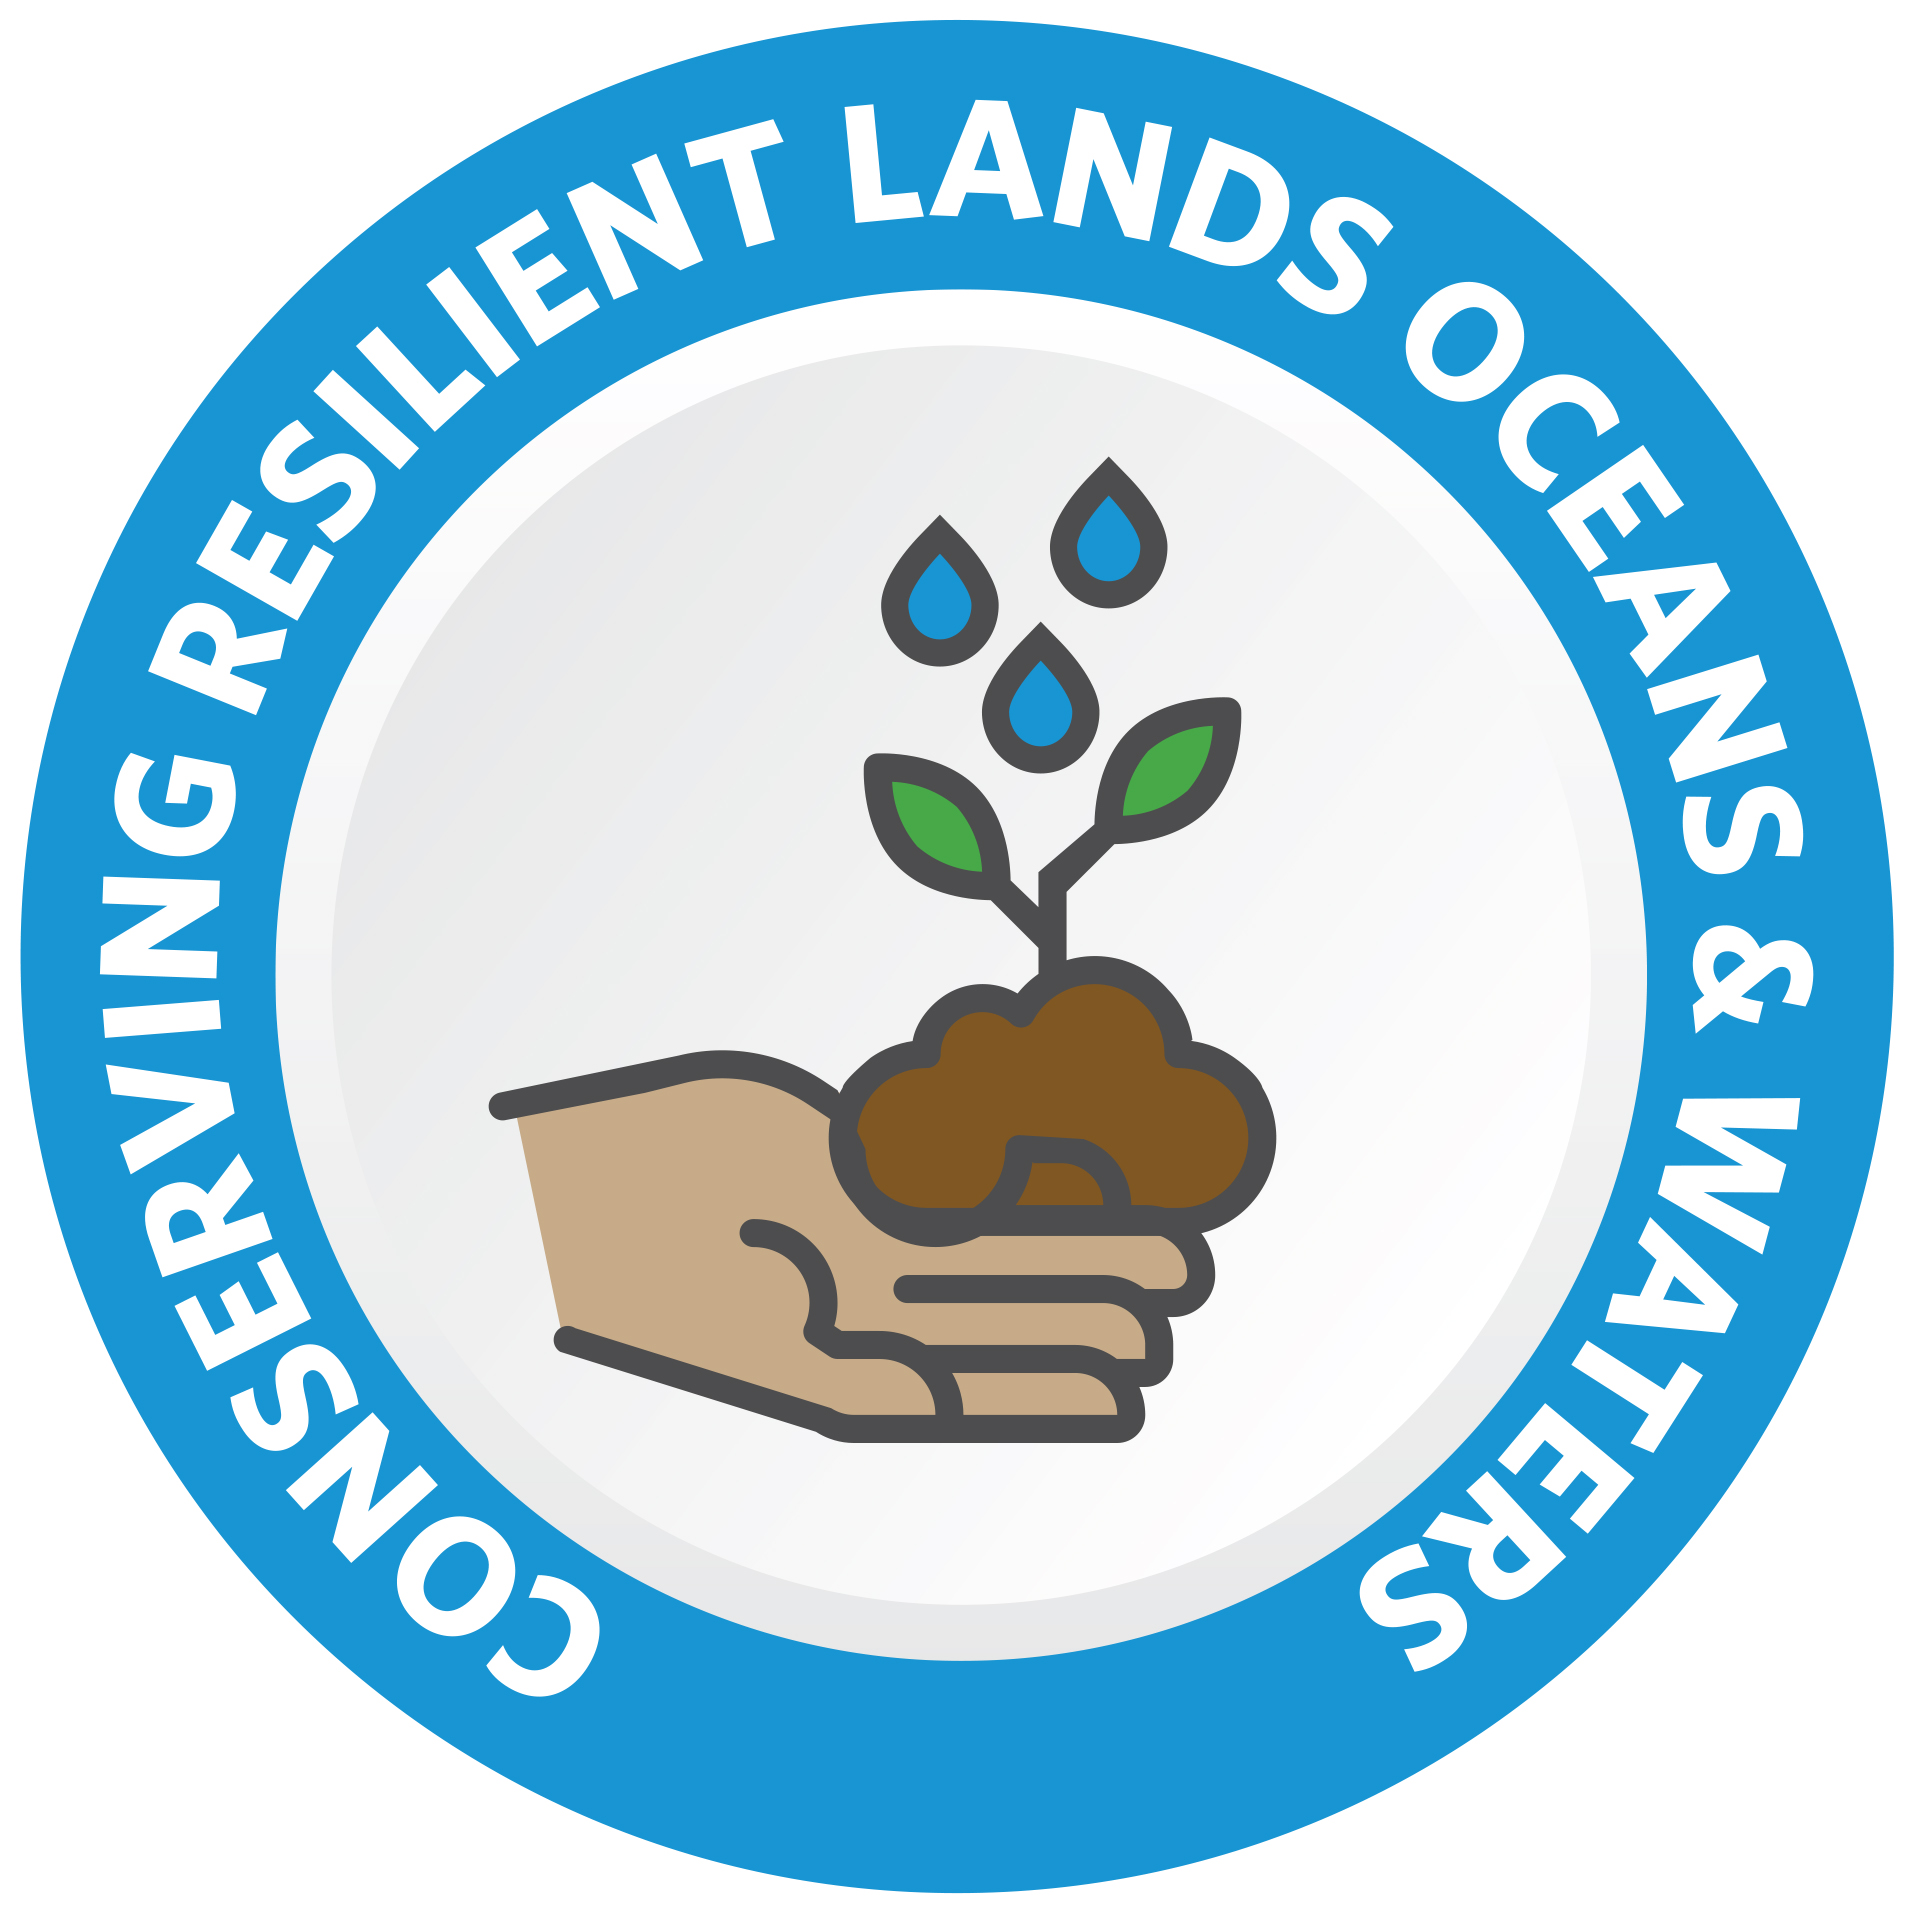 Conserving resilient lands, oceans and waters.